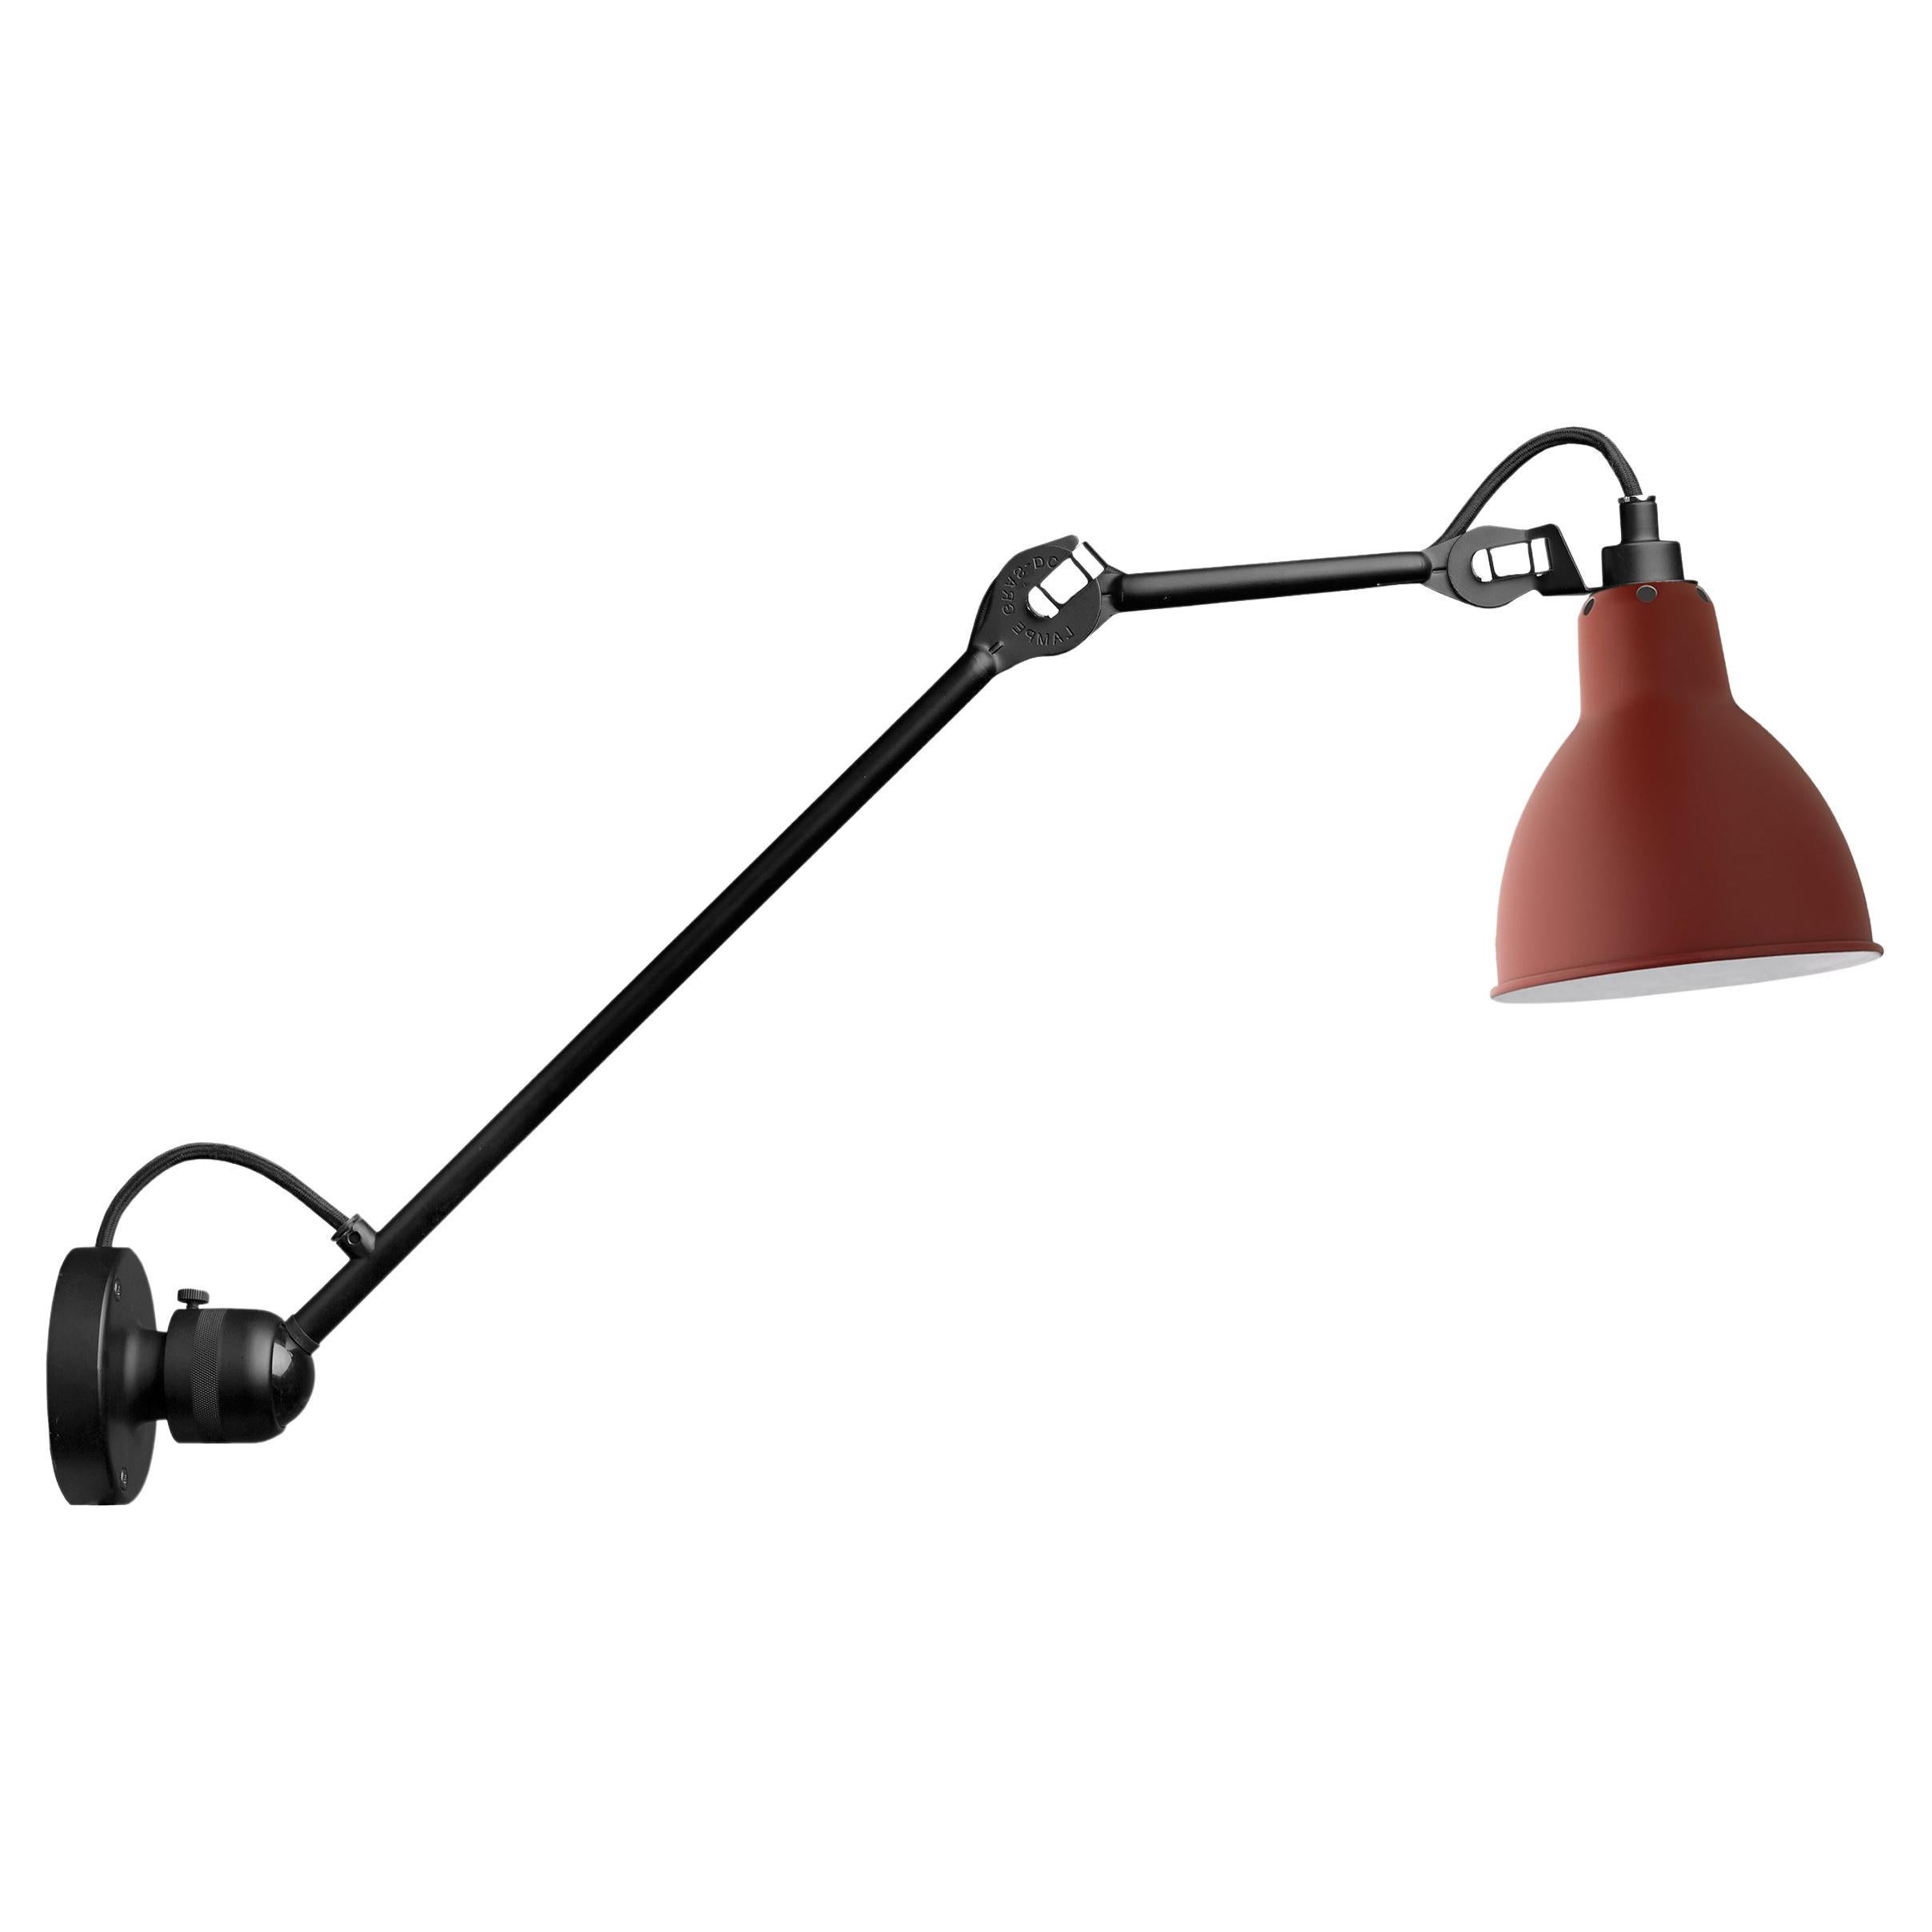 DCW Editions La Lampe Gras N°304 L40 Wall Lamp in Black Arm and Red Shade For Sale